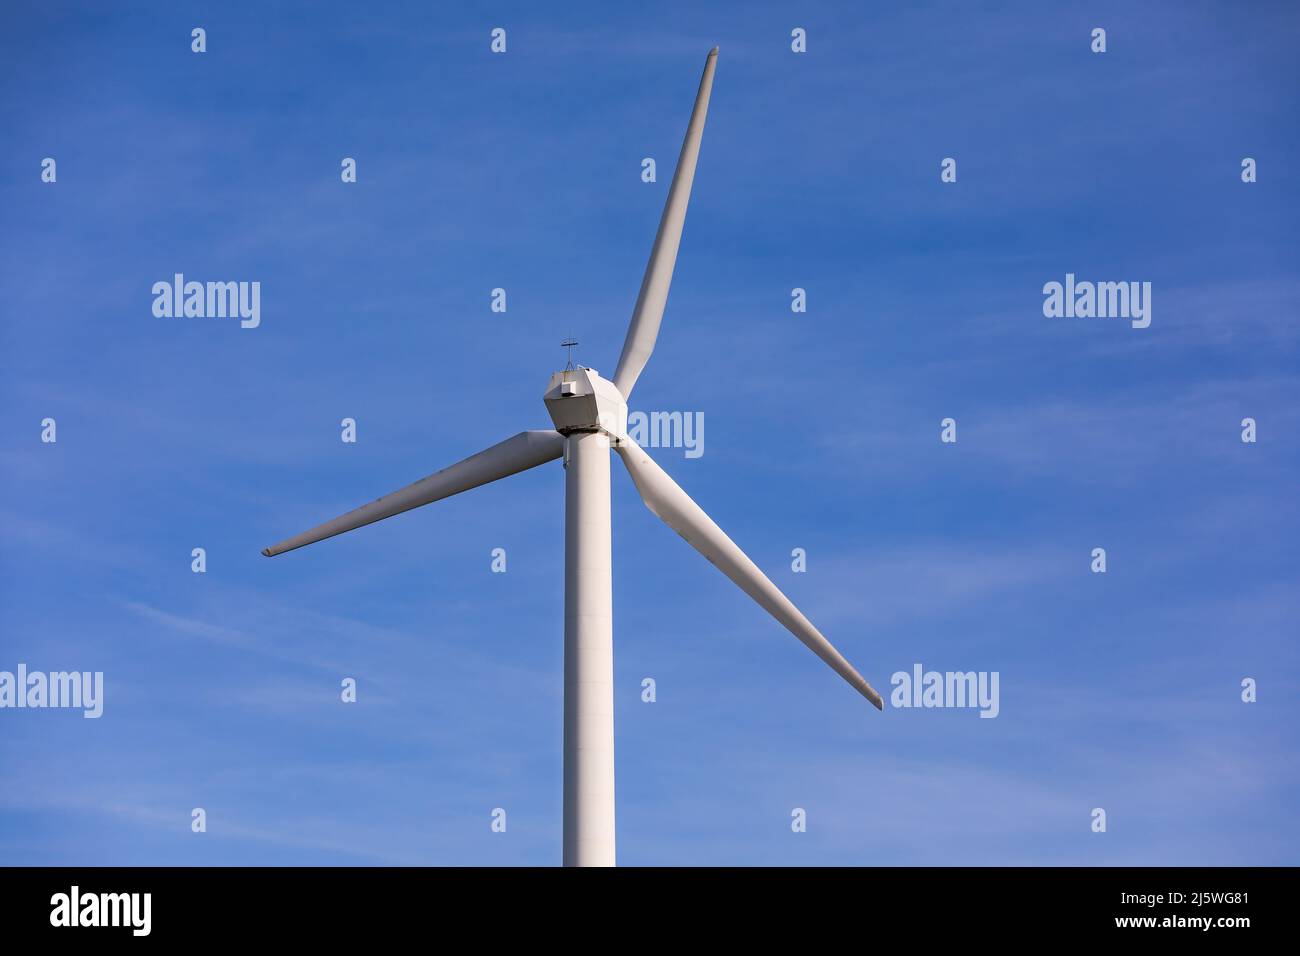 Aerial view of a wind turbine with red and white propellers Stock Photo